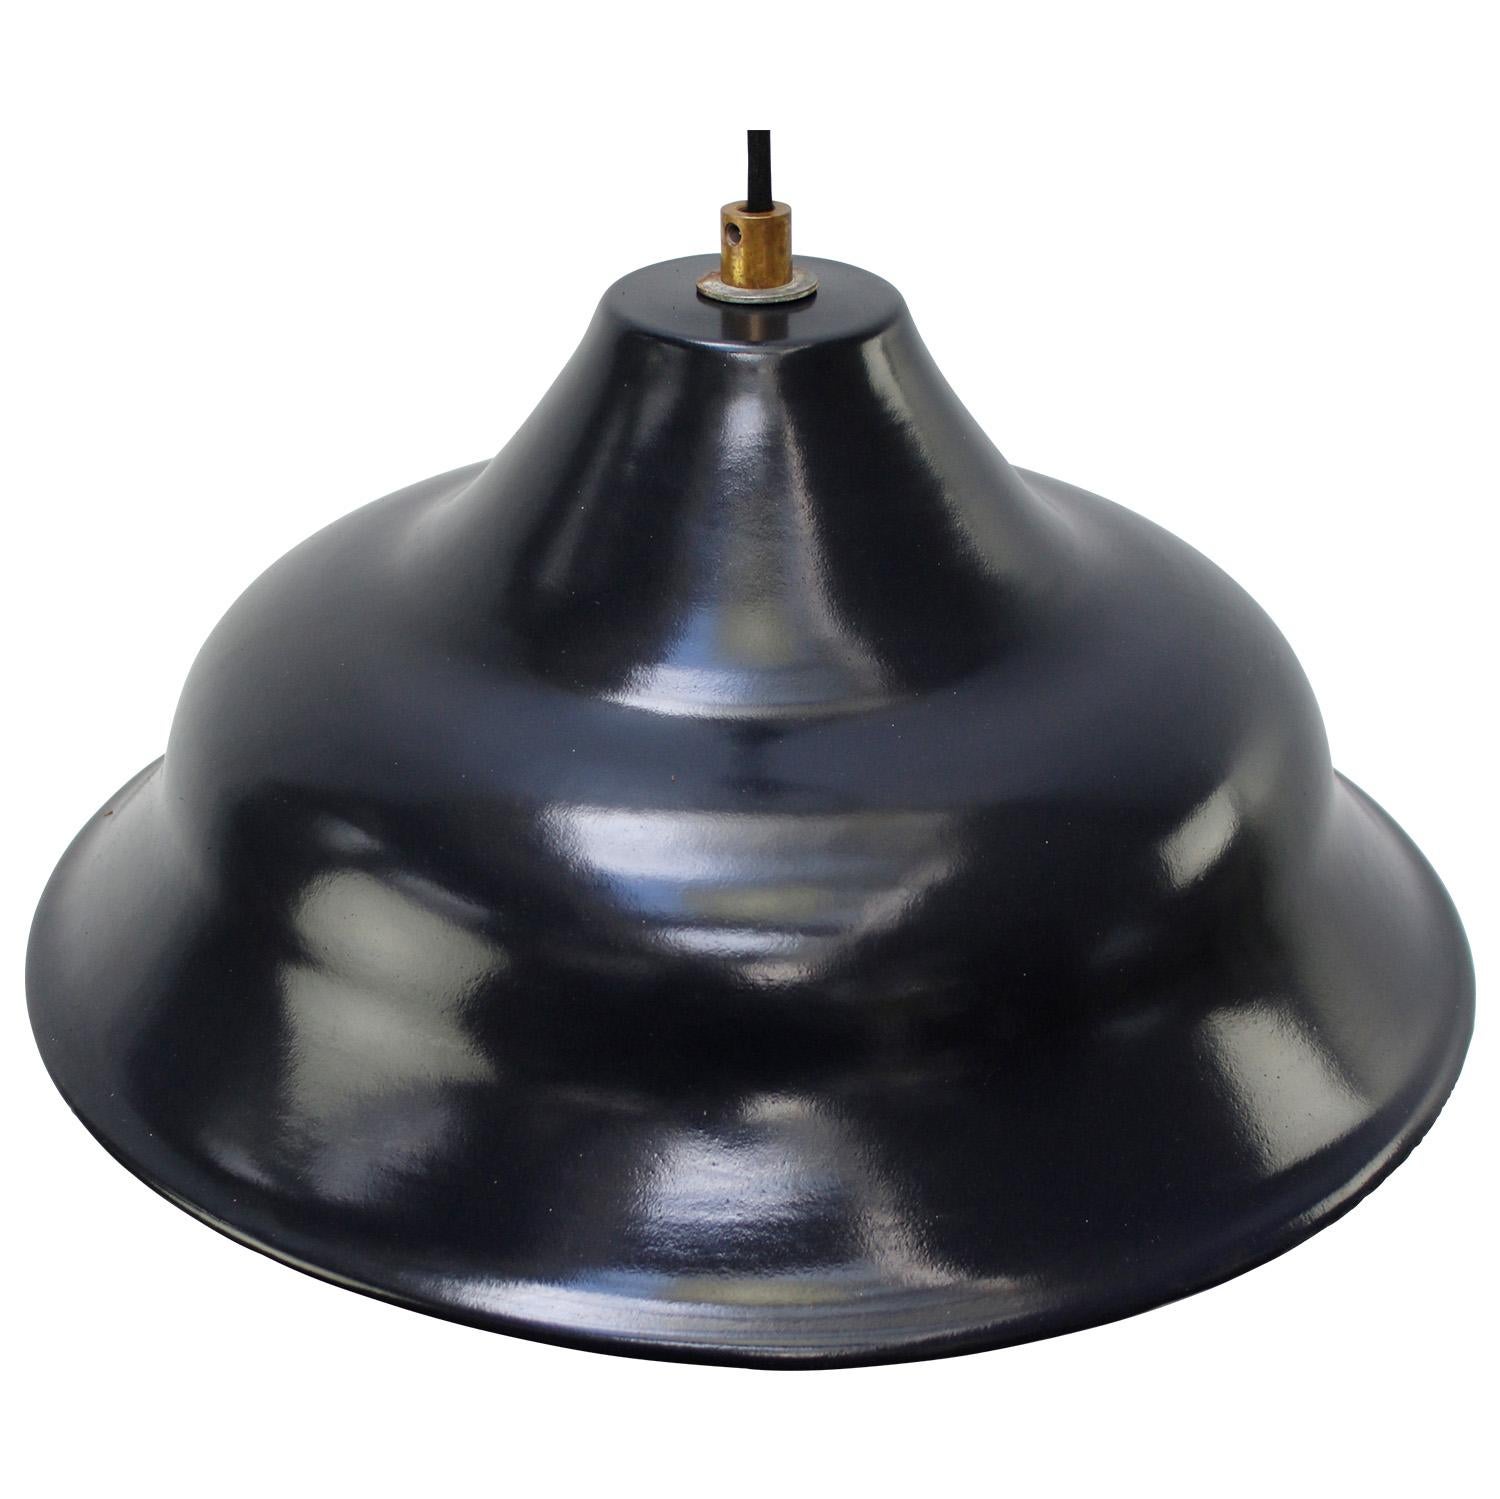 Black Dark Blue industrial pendant lamp
White interior with brass top.

Weight: 2.30 kg / 5.1 lb

Priced per individual item. All lamps have been made suitable by international standards for incandescent light bulbs, energy-efficient and LED bulbs.